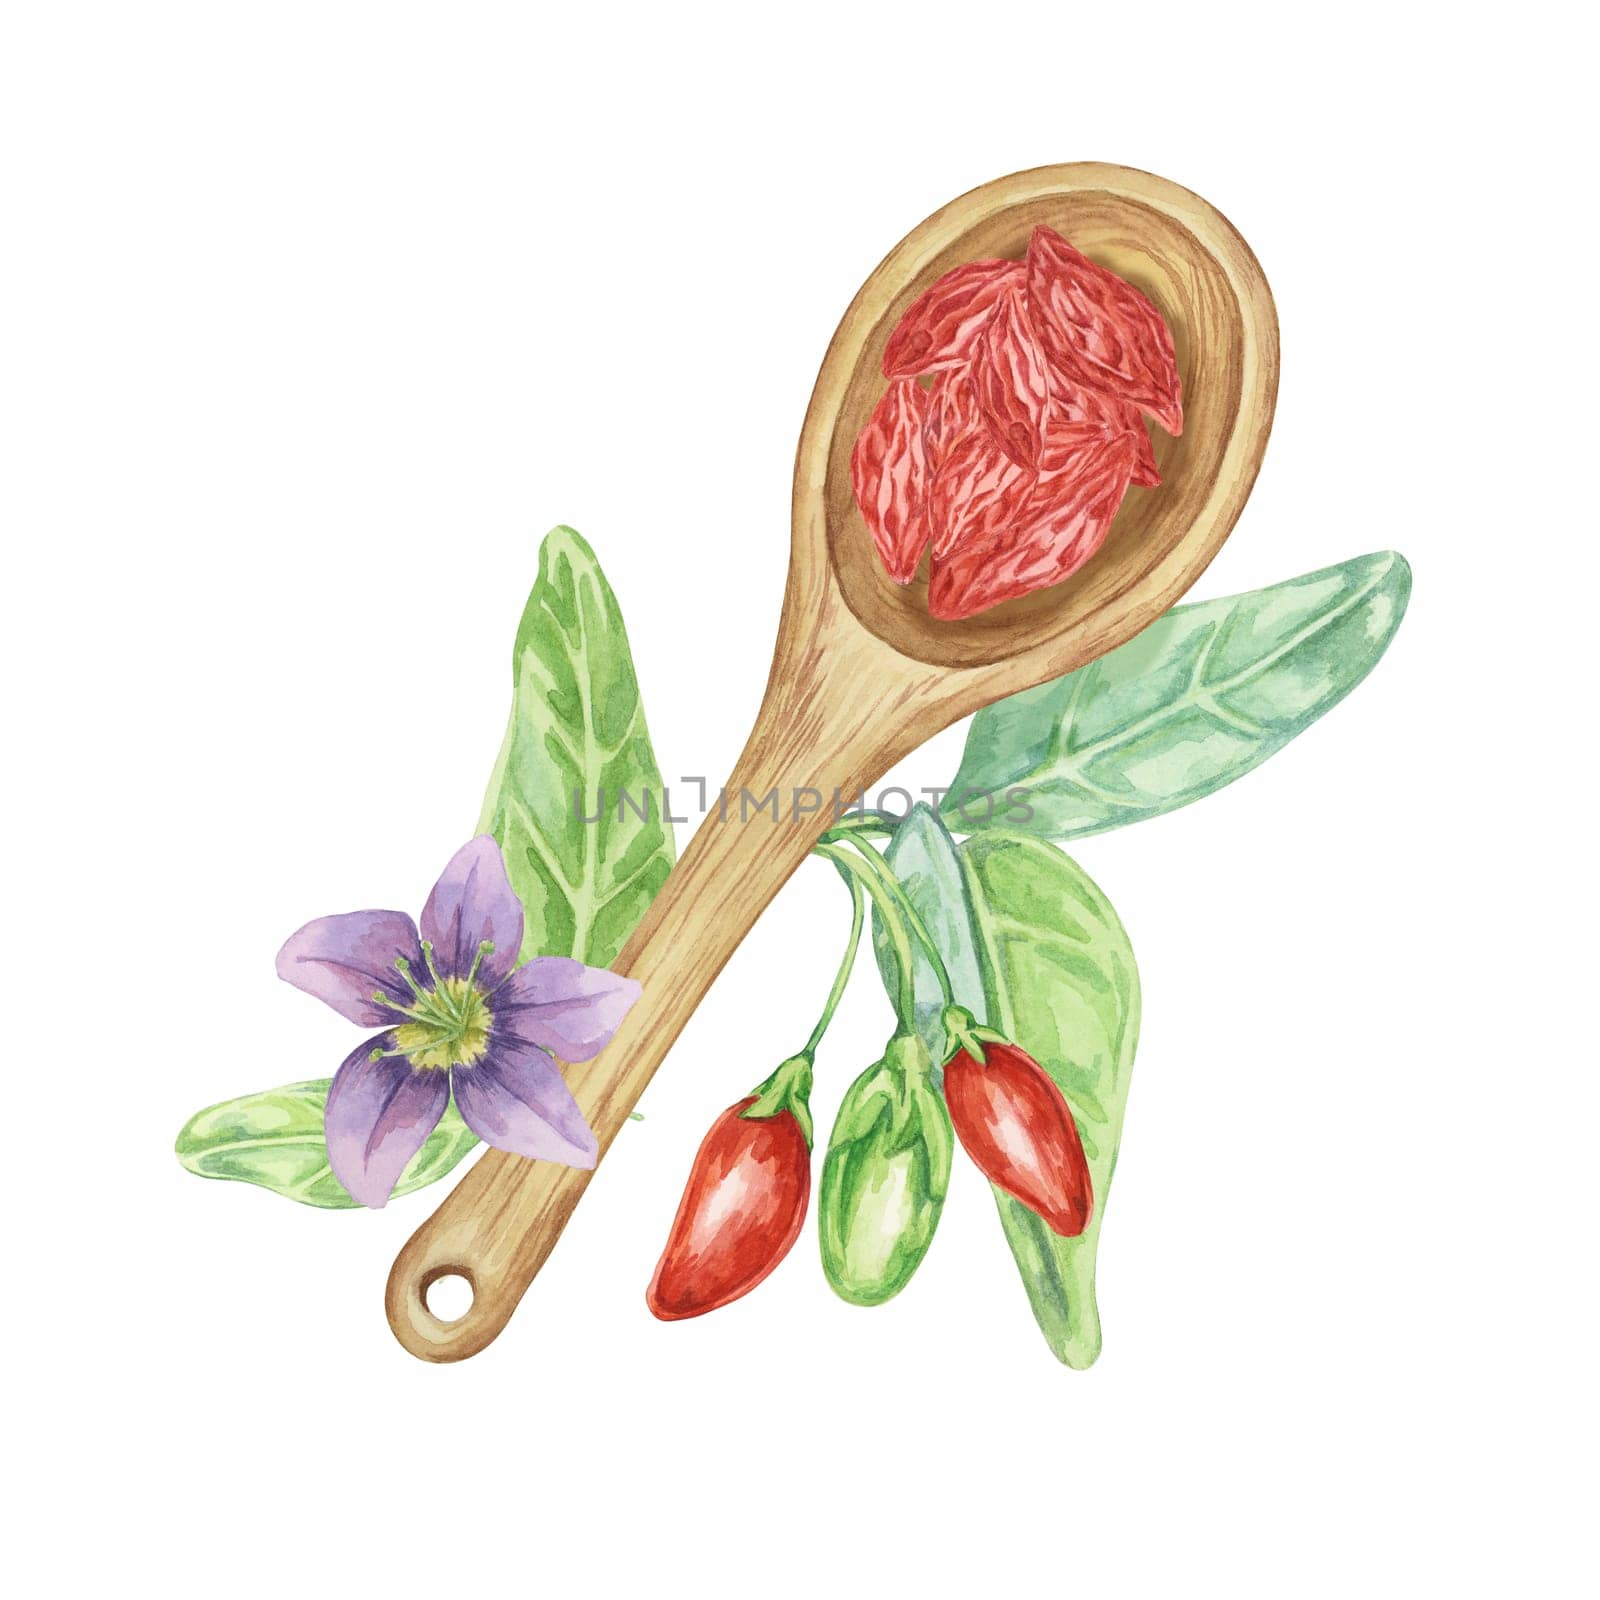 Composition with spoon and dry goji berries by Fofito